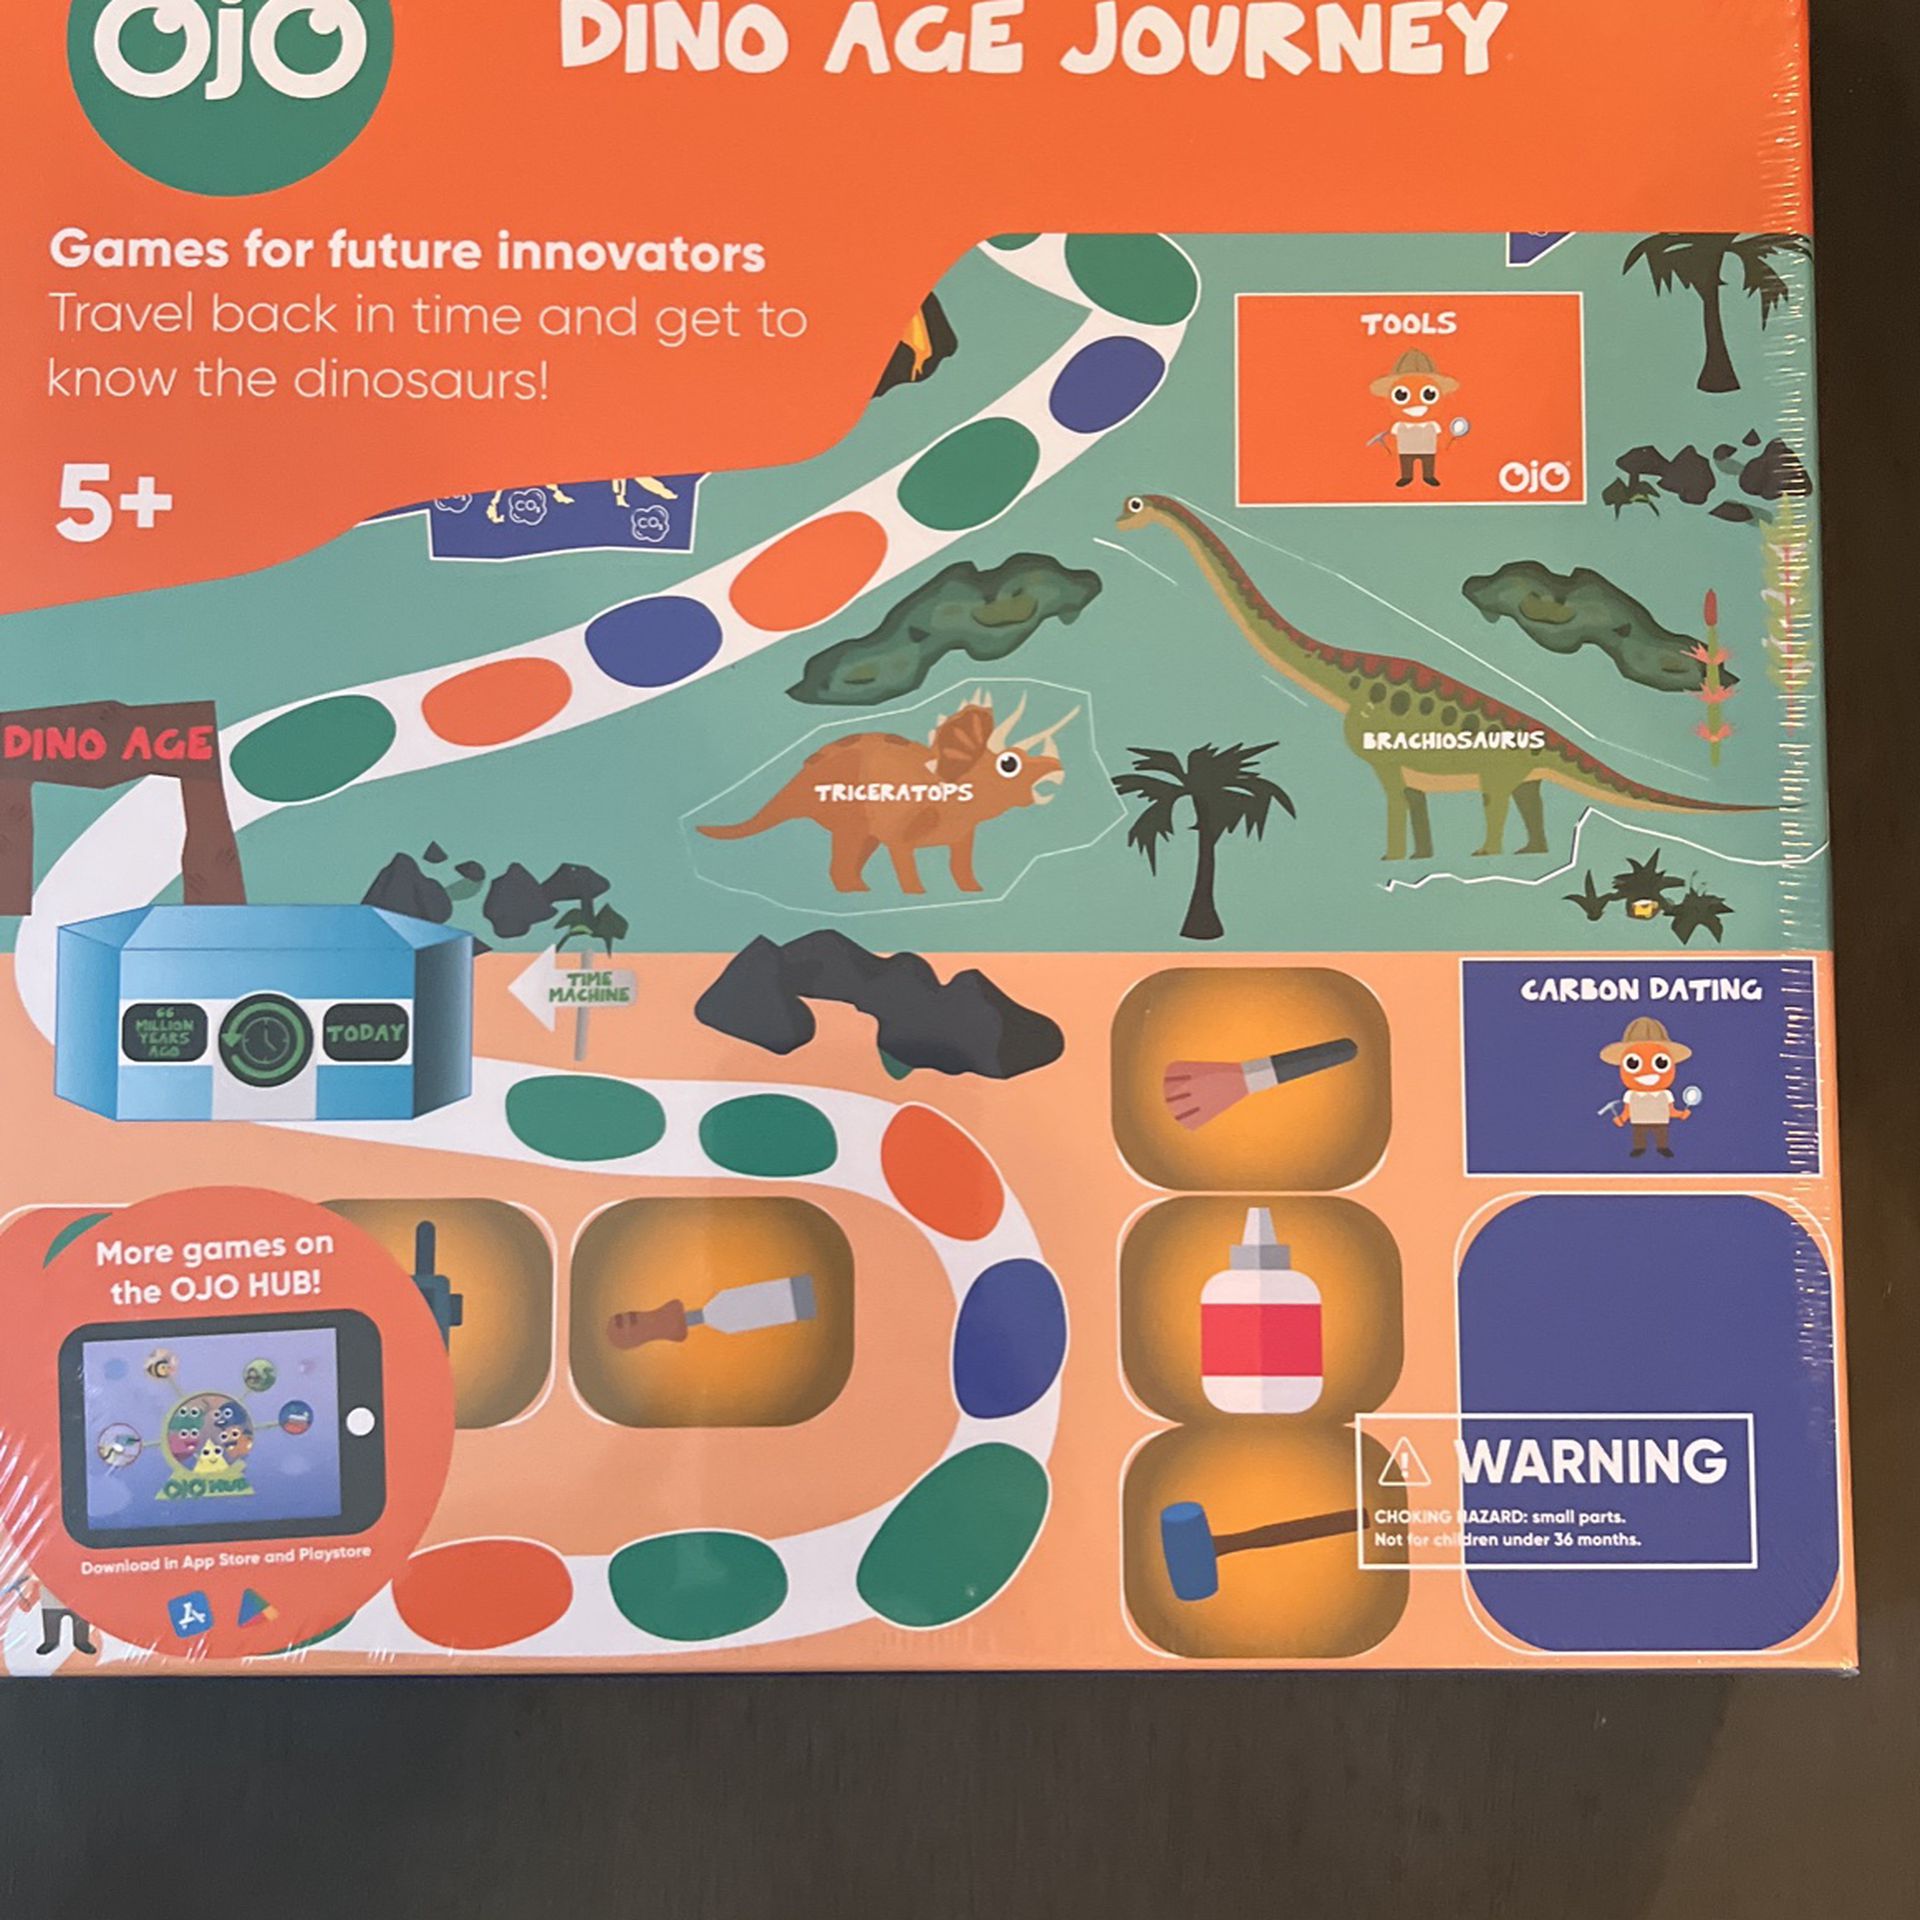 Game For Children. Educational Dino age journey